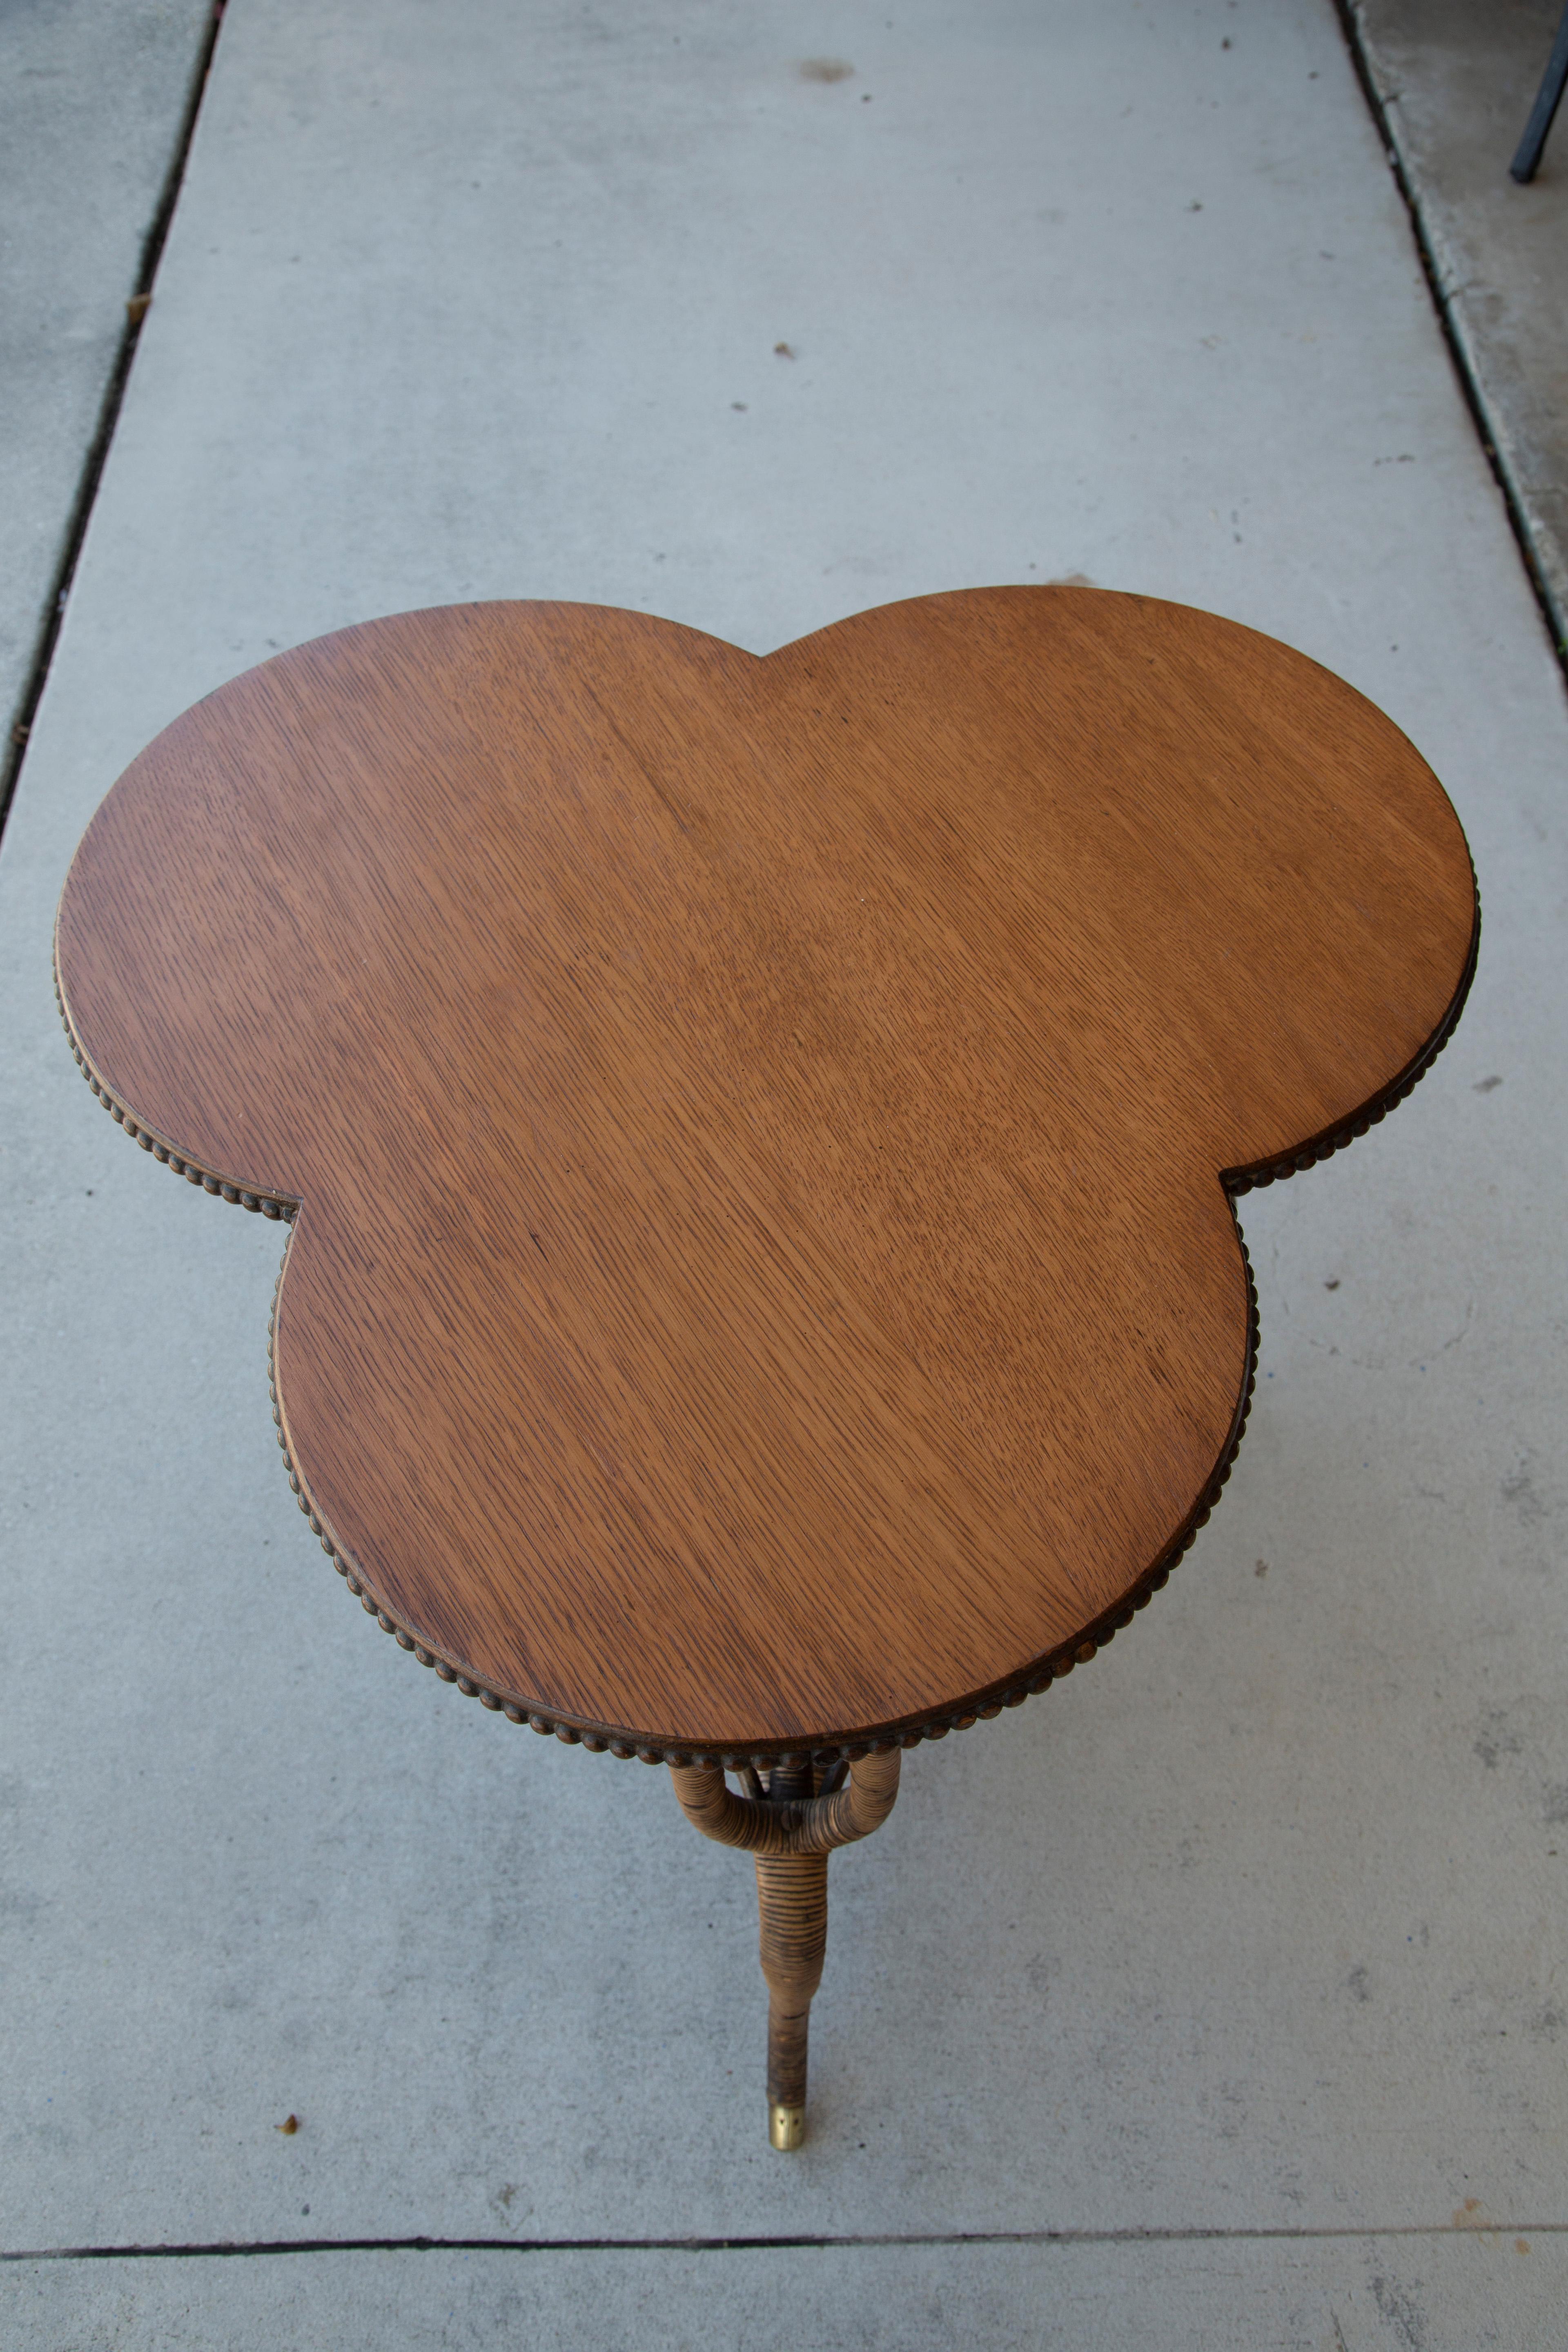 Antique oak clover leaf shaped table with wood beading surrounding the edges. Curved legs with brass trimmed ends.